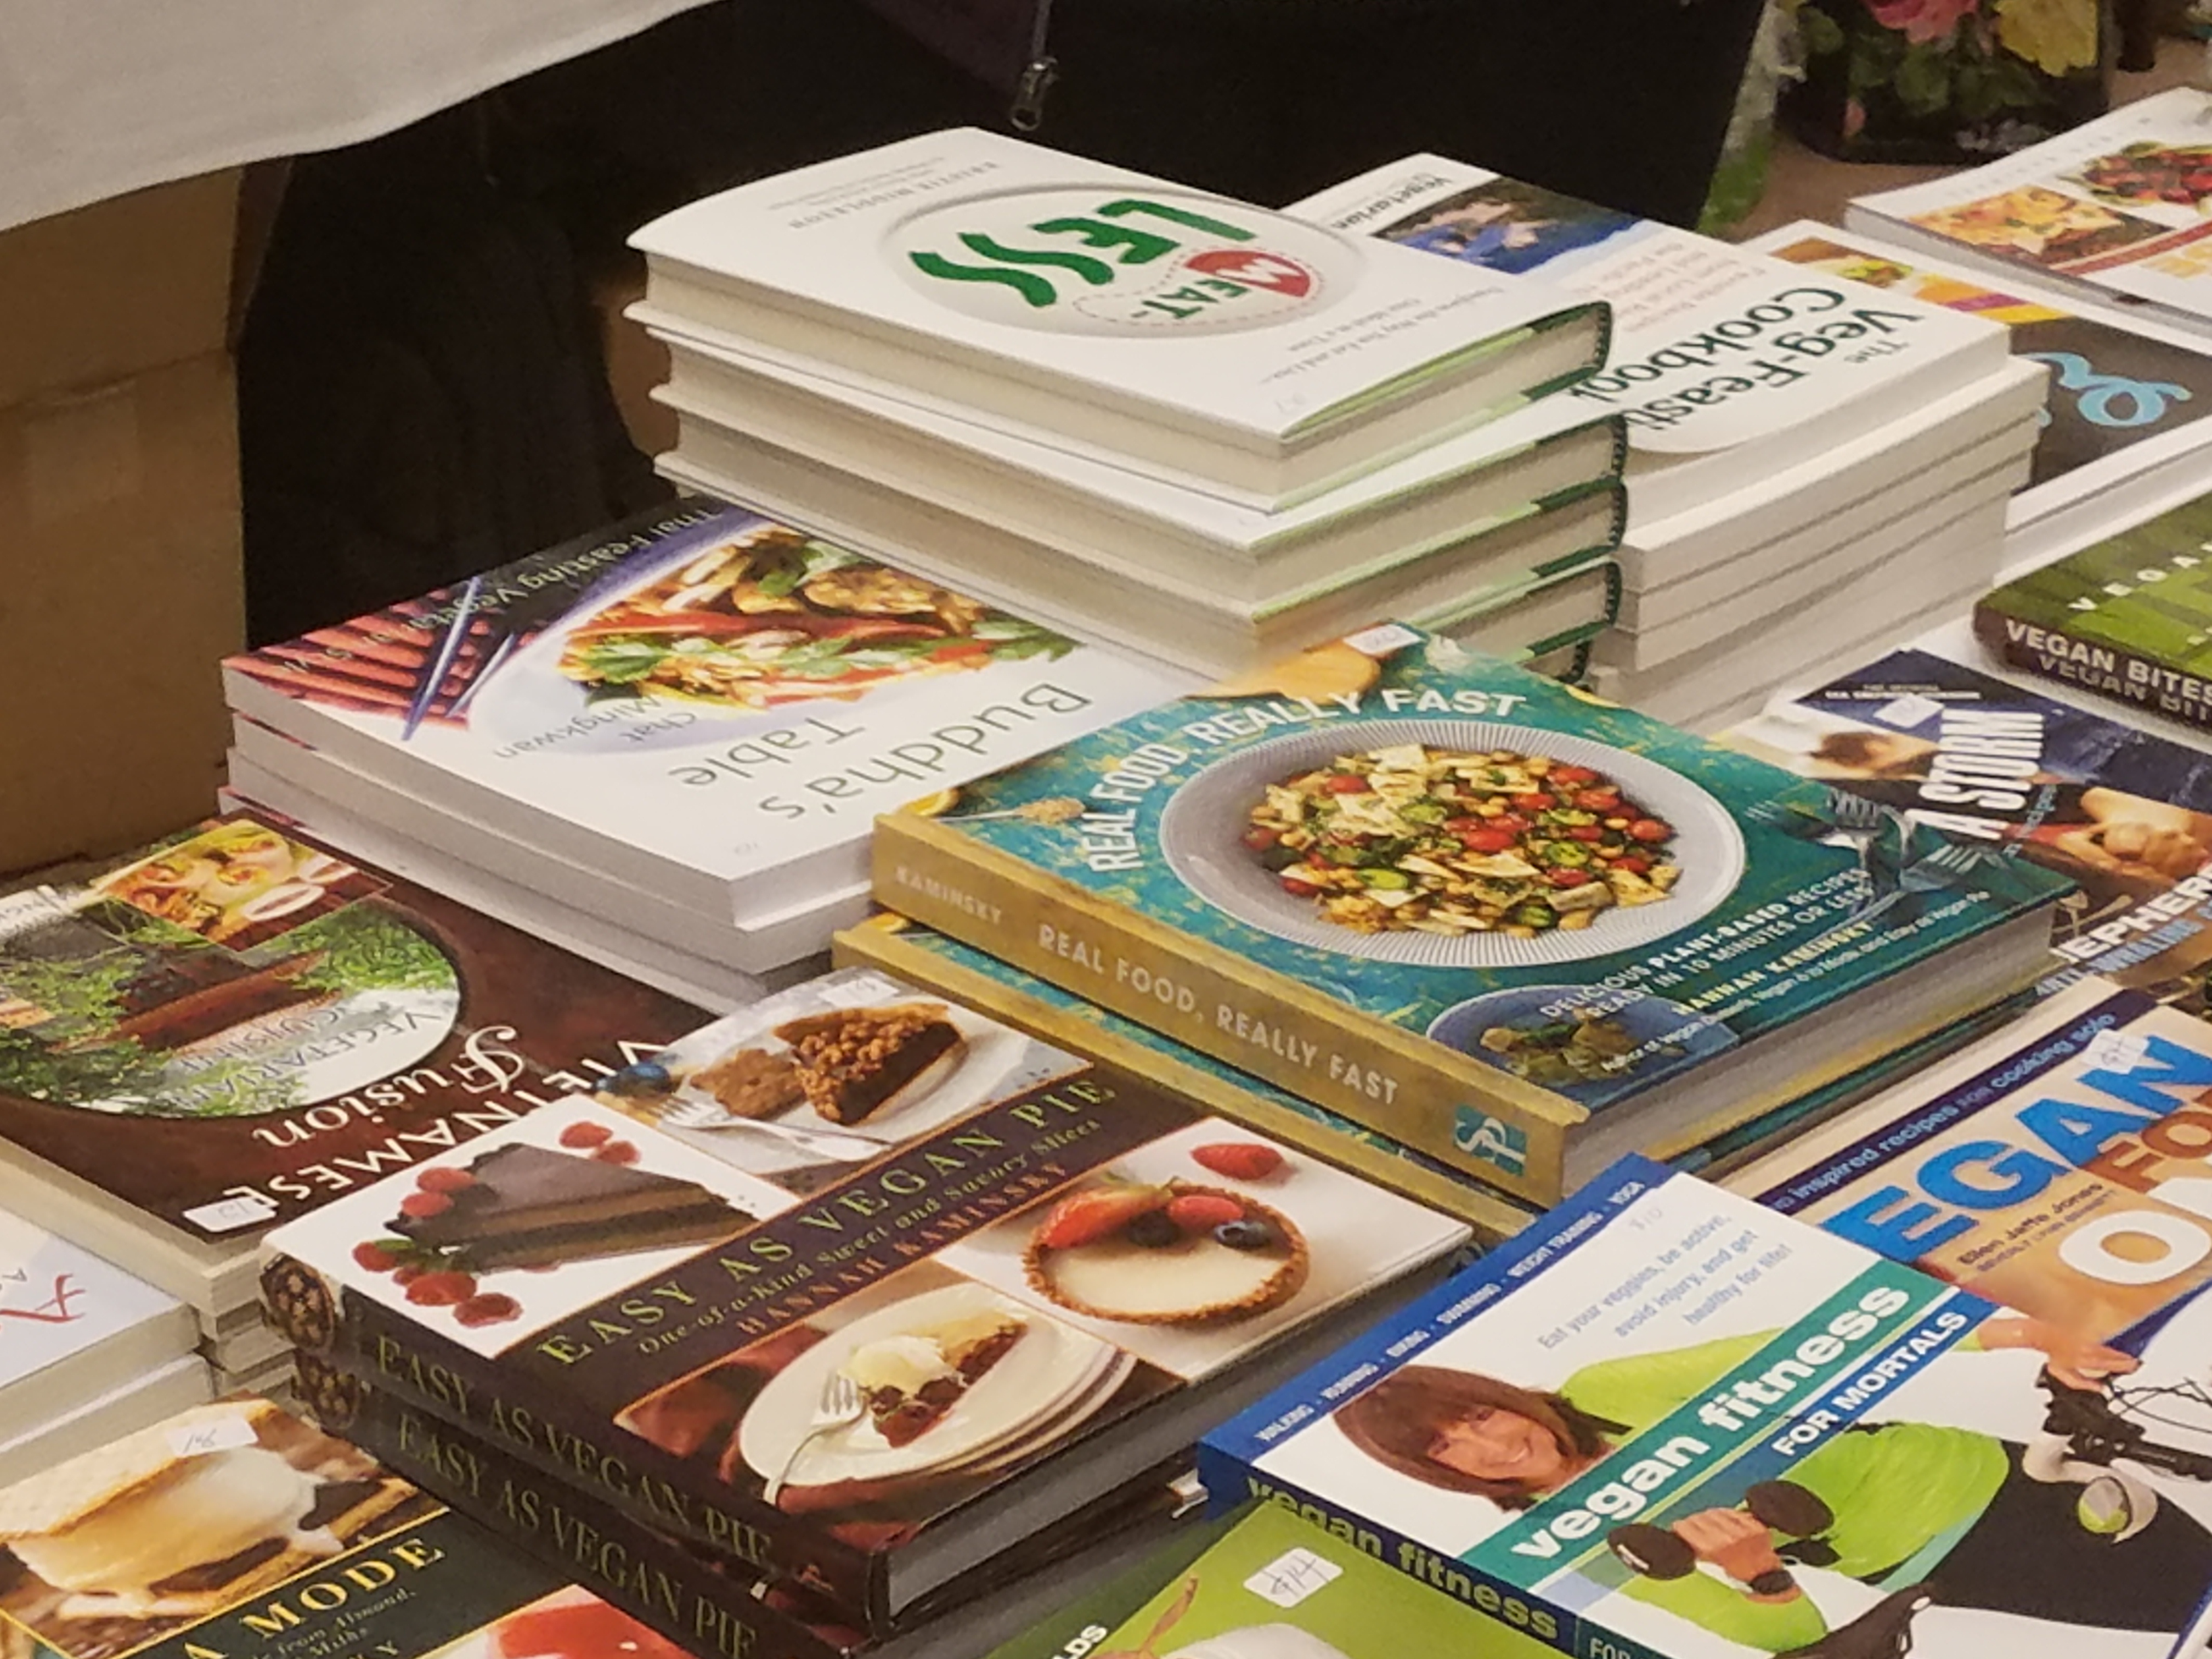 Living well in the 21st century. Limassol, Cyprus. A picture of books ranging from cookbooks from vegan to vegetarian. 